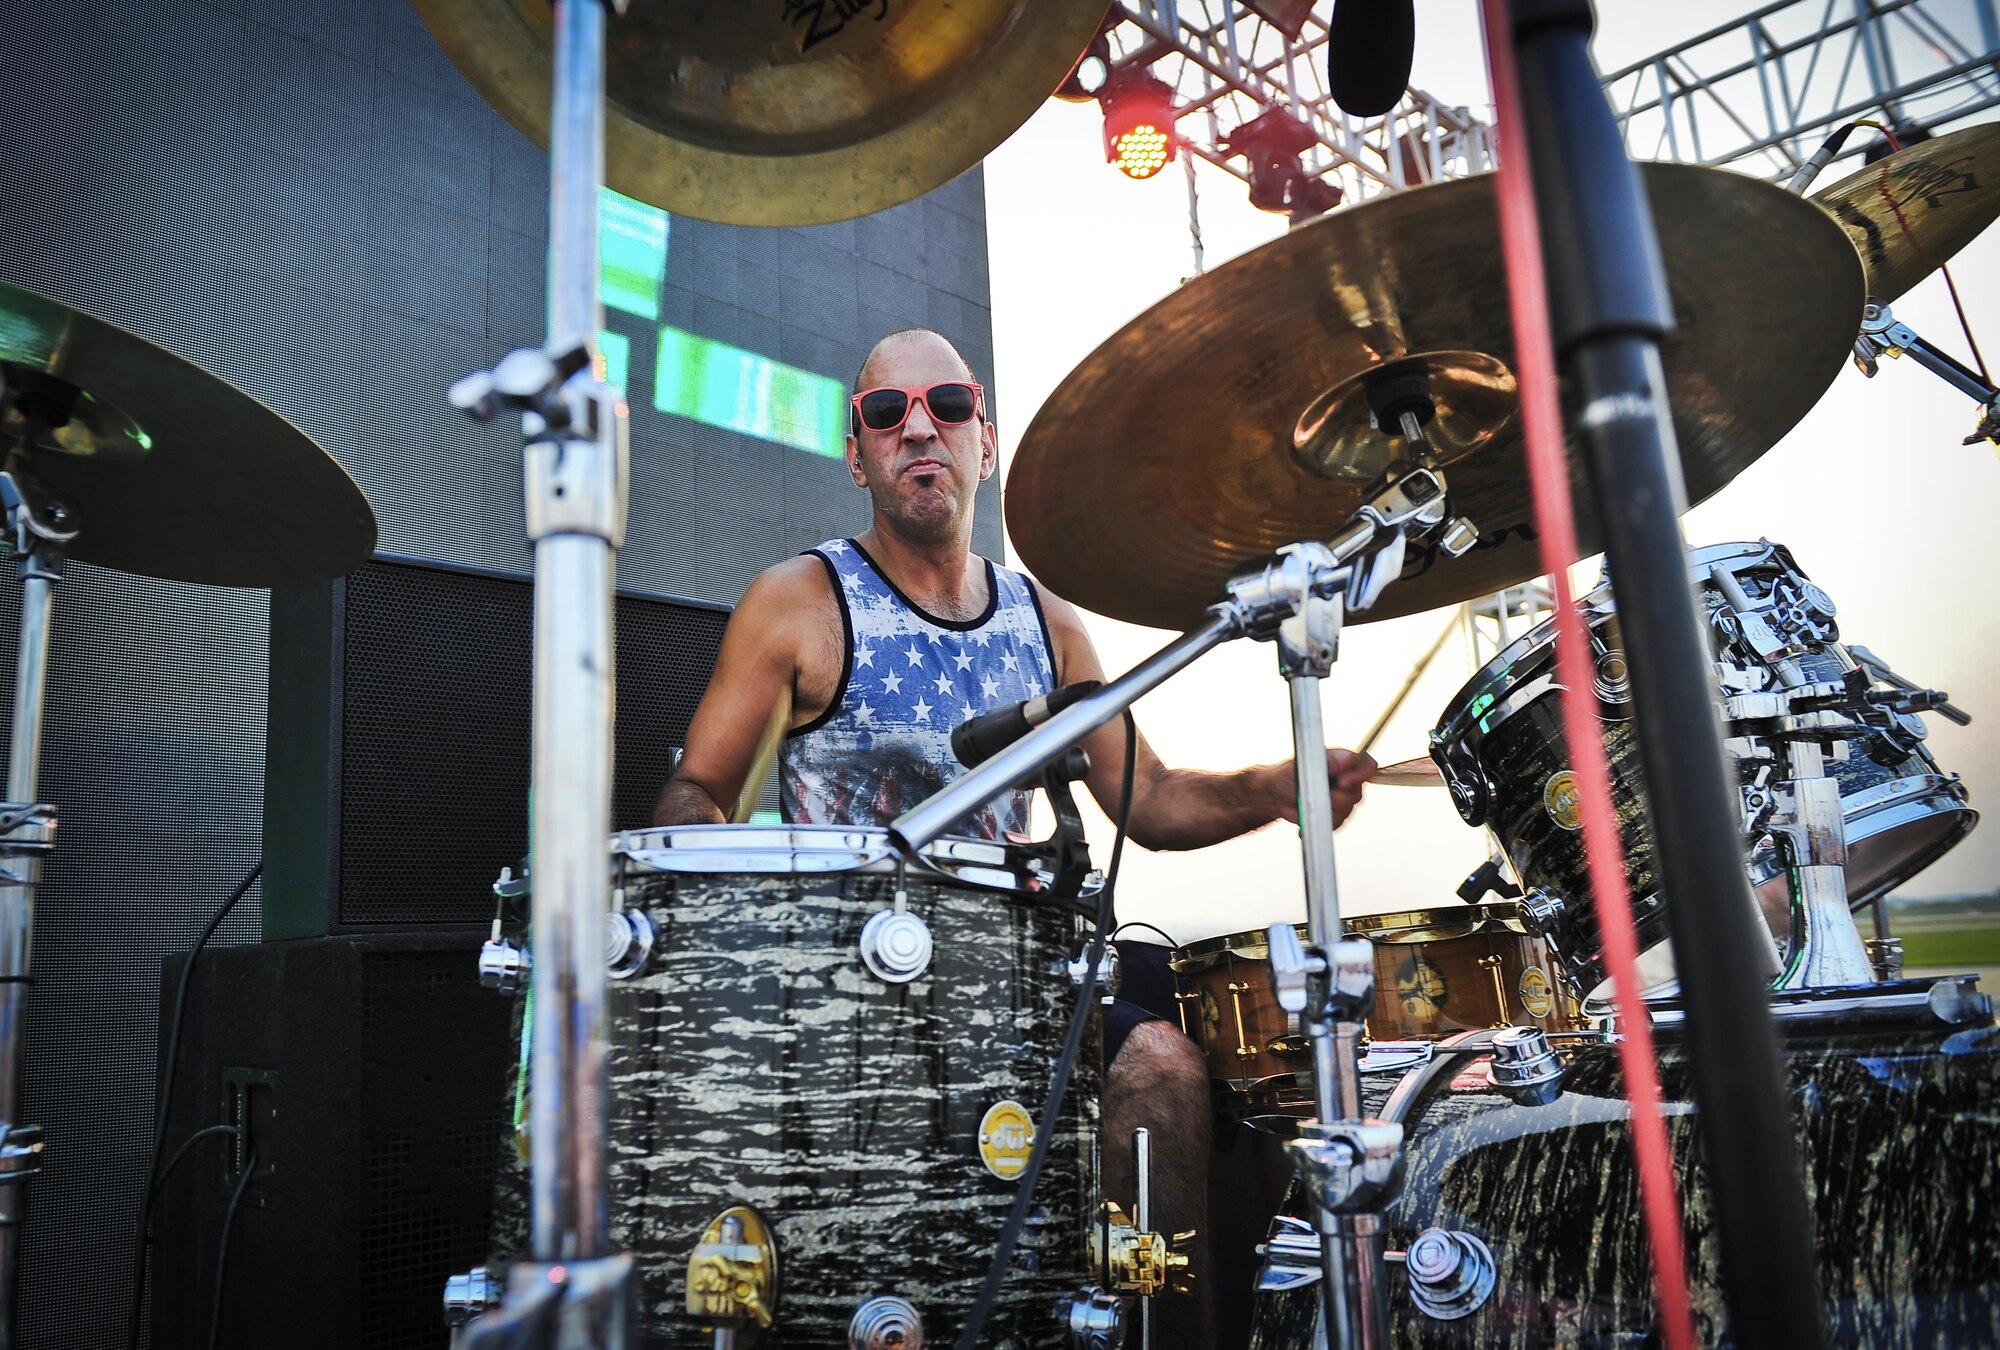 Mike Cosgrove, Alien Ant Farm drummer, smirks at the photographer during a song at the Liberty Fest concert July 4, 2015 at Osan Air Base, Republic of Korea. Alien Ant Farm was at Osan AB in part of the Liberty Fest entertainment, in celebration of Independence Day. (U.S. Air Force photo/Tech. Sgt. Travis Edwards)
